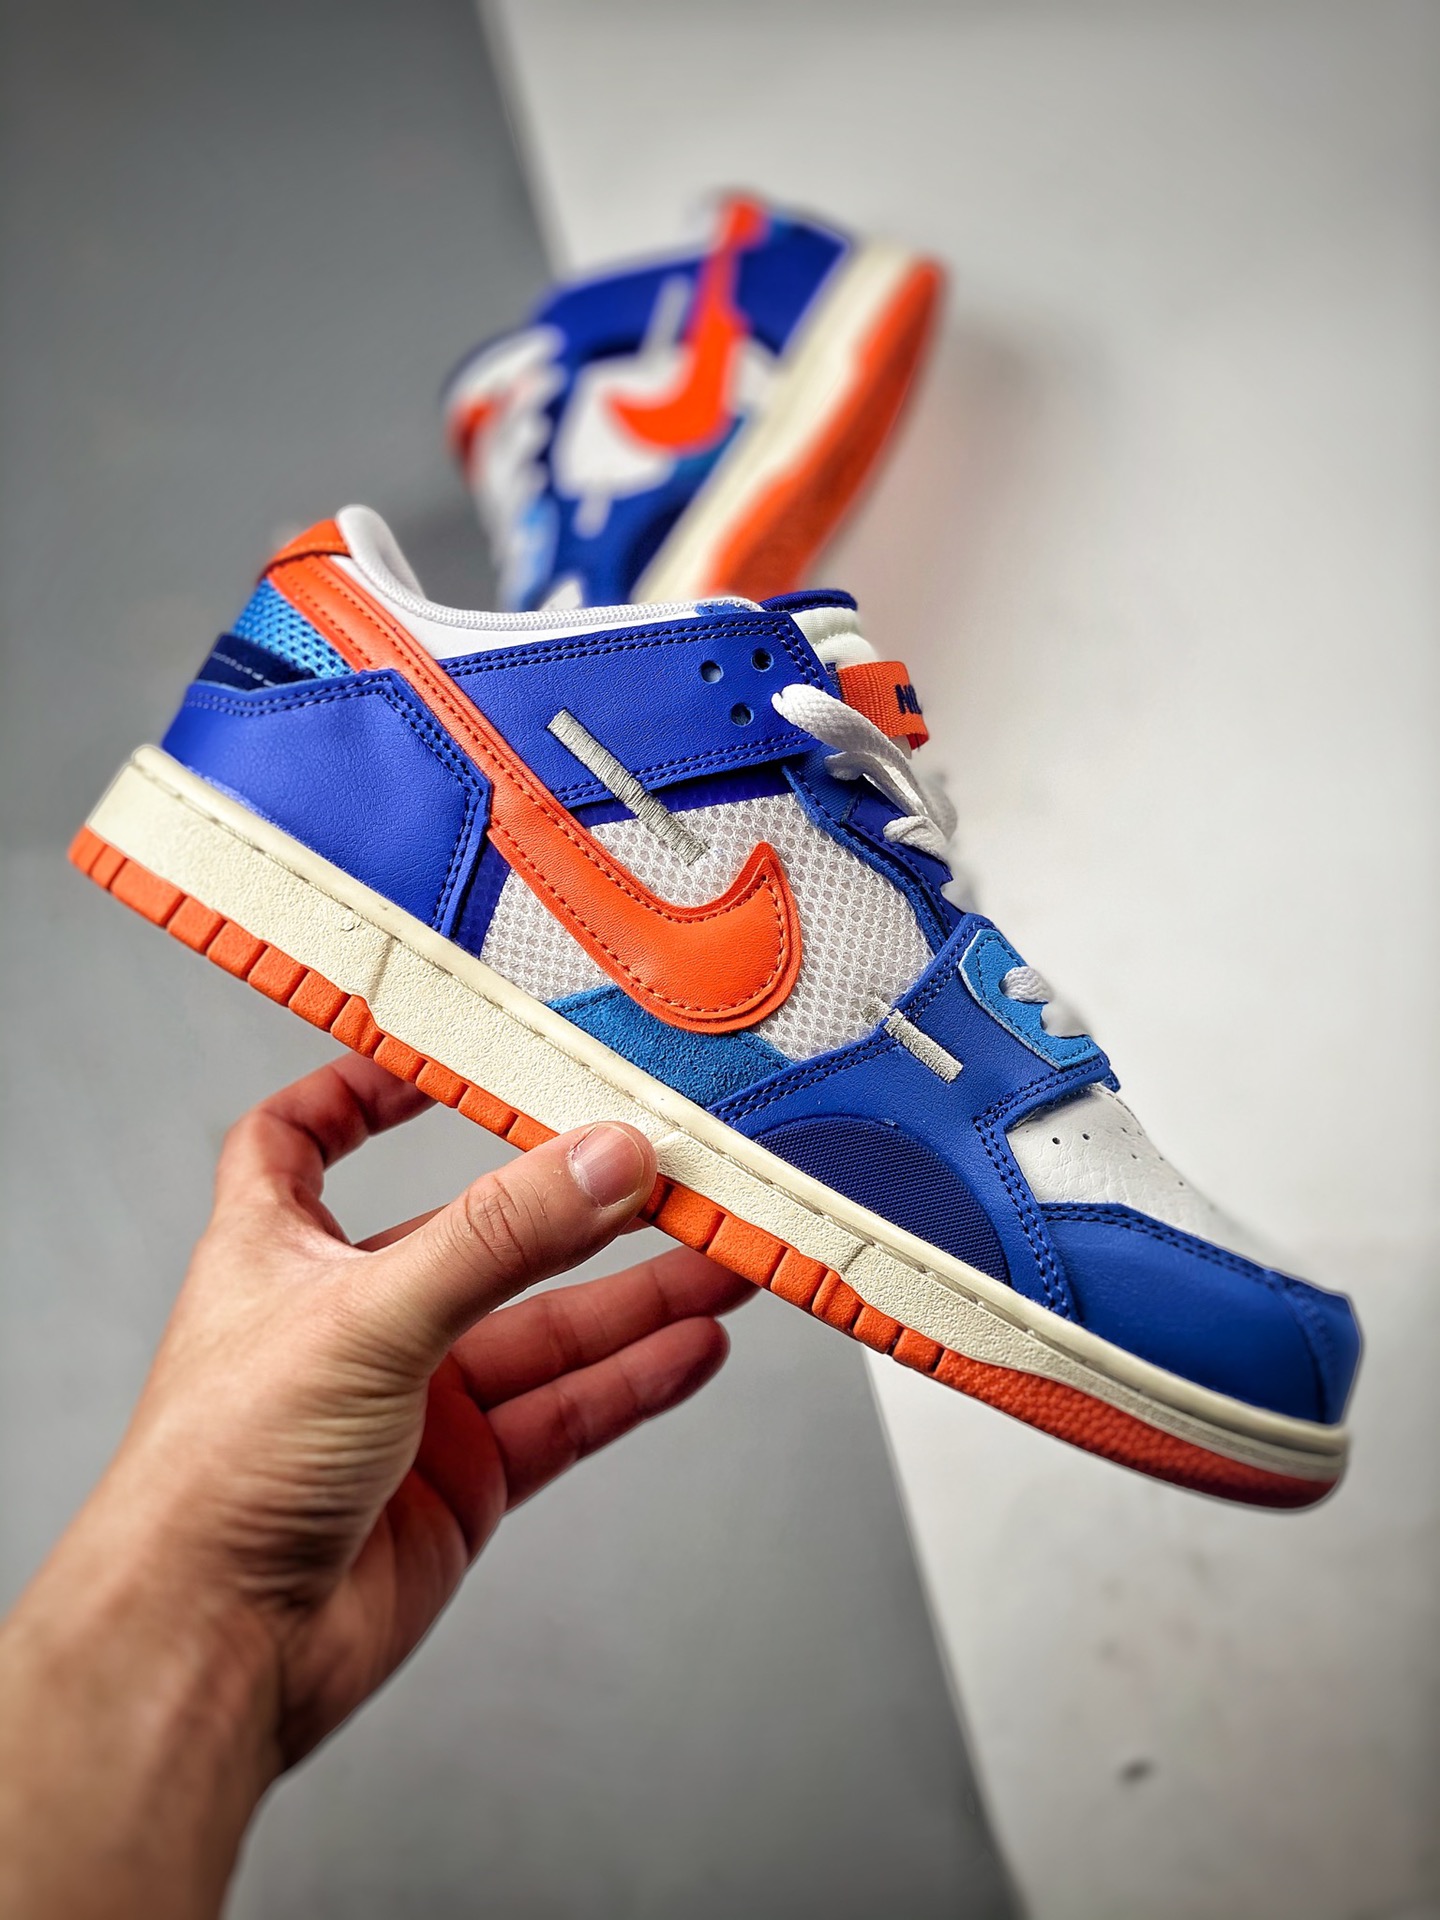 Nike Dunk low Scrap Knicks. Most sizes available.